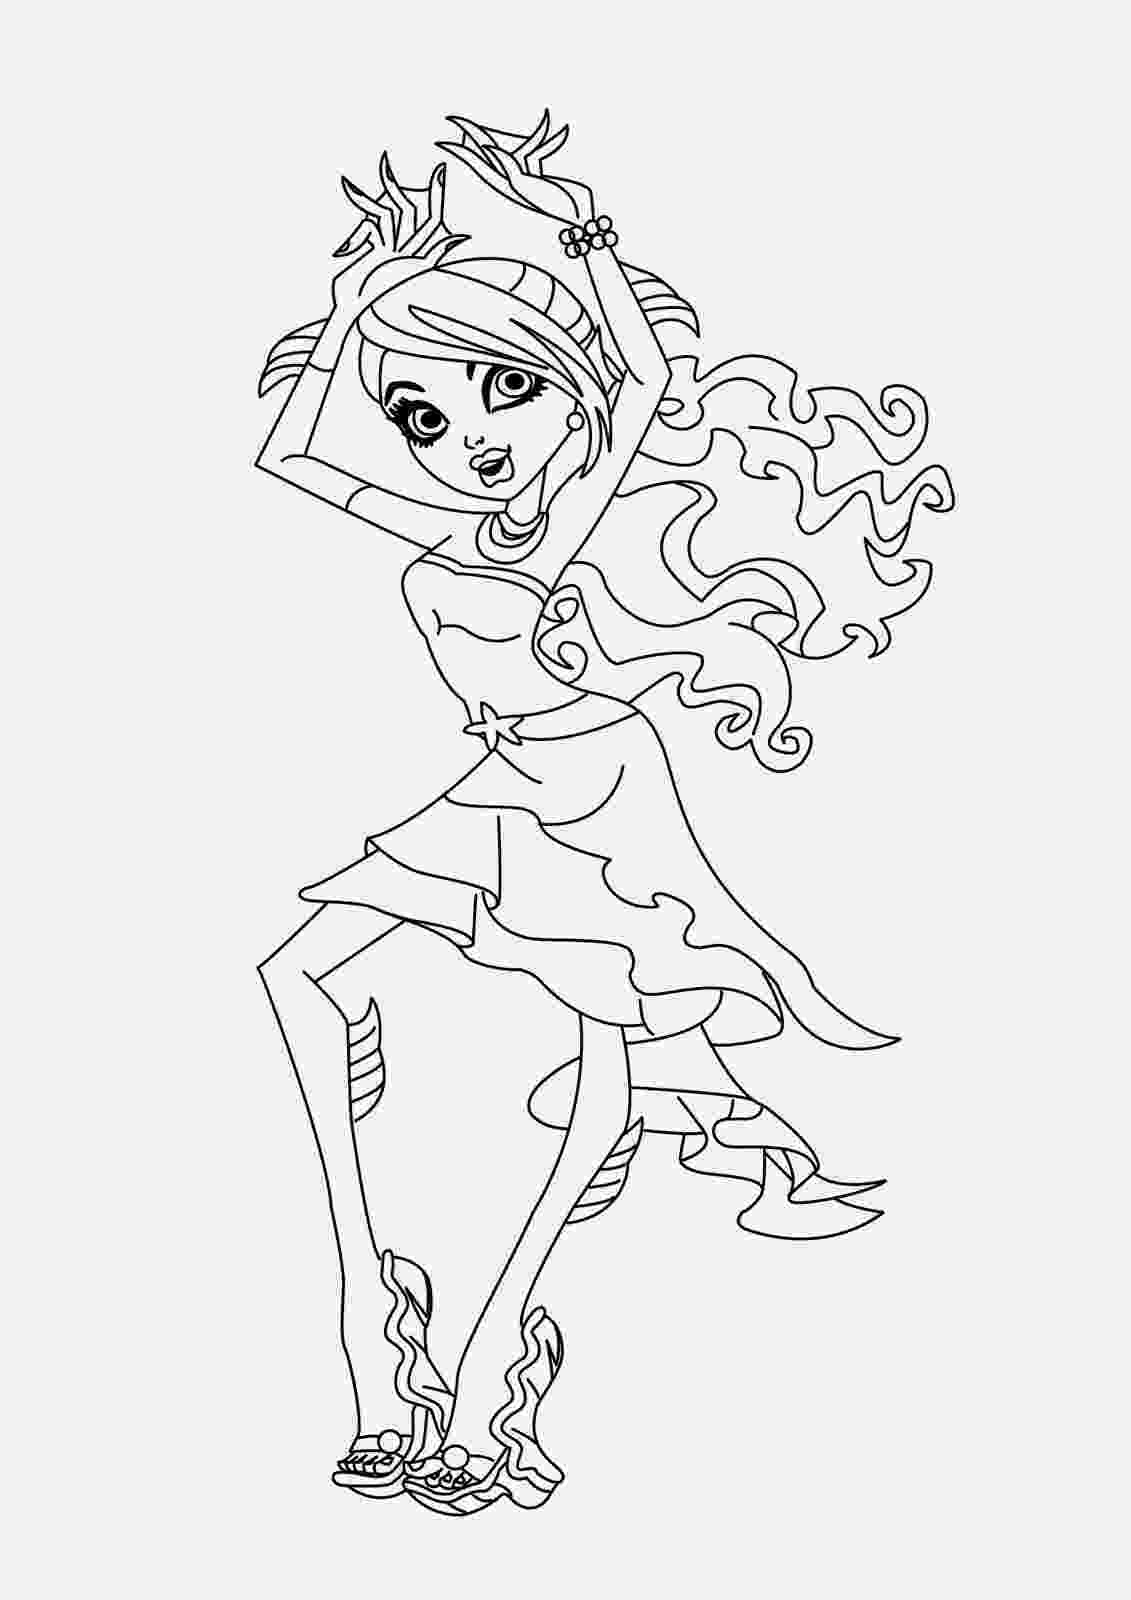 monster high coloring pics coloring pages monster high coloring pages free and printable coloring pics high monster 